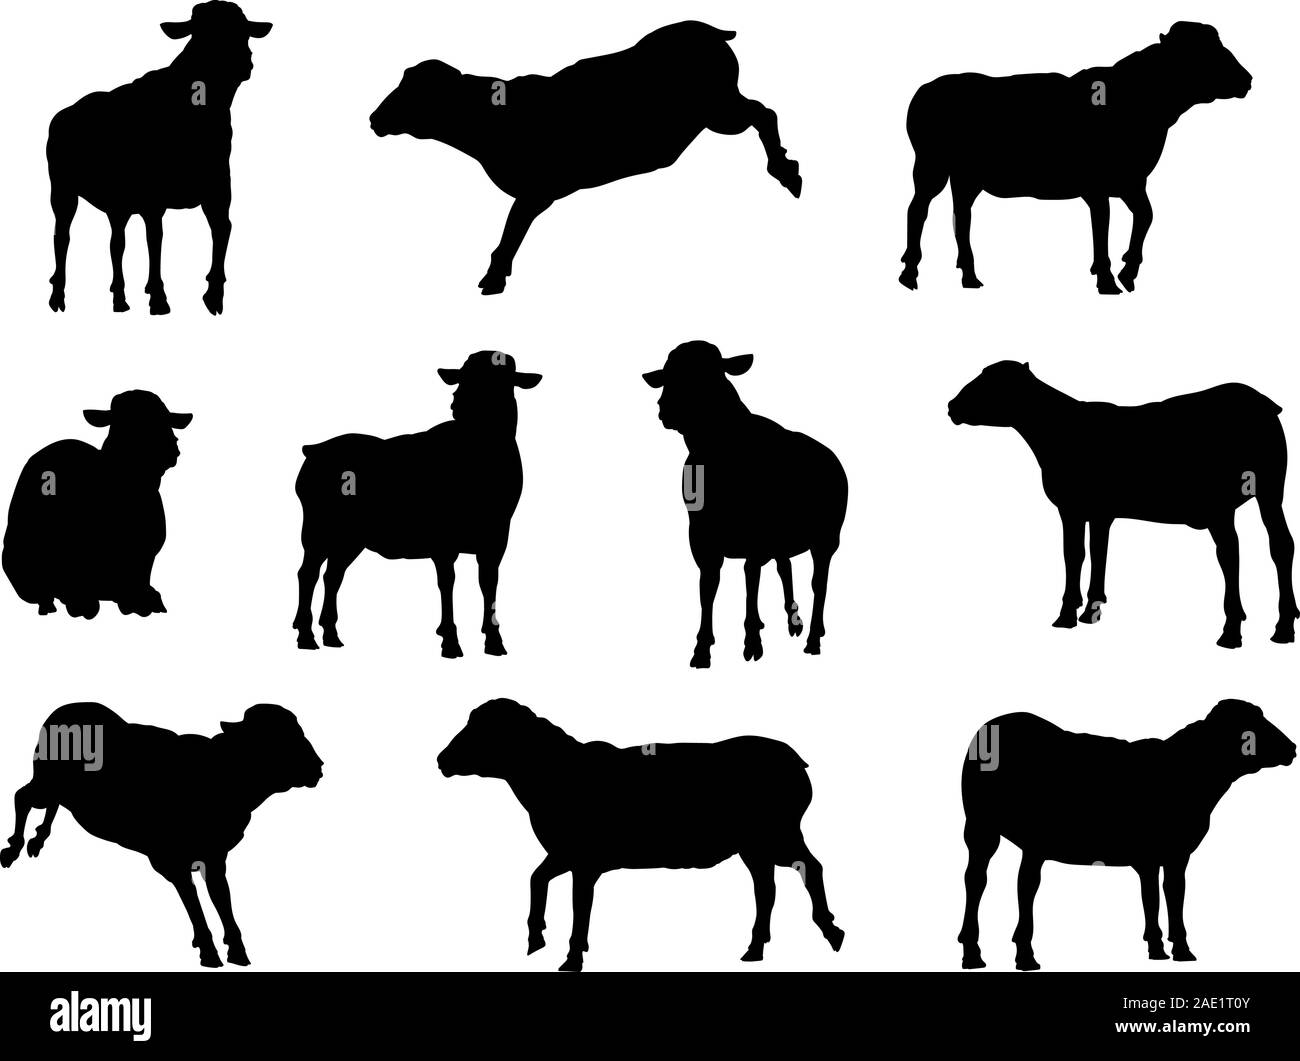 Sheep or Lambs Farm Animals in Silhouette Stock Vector